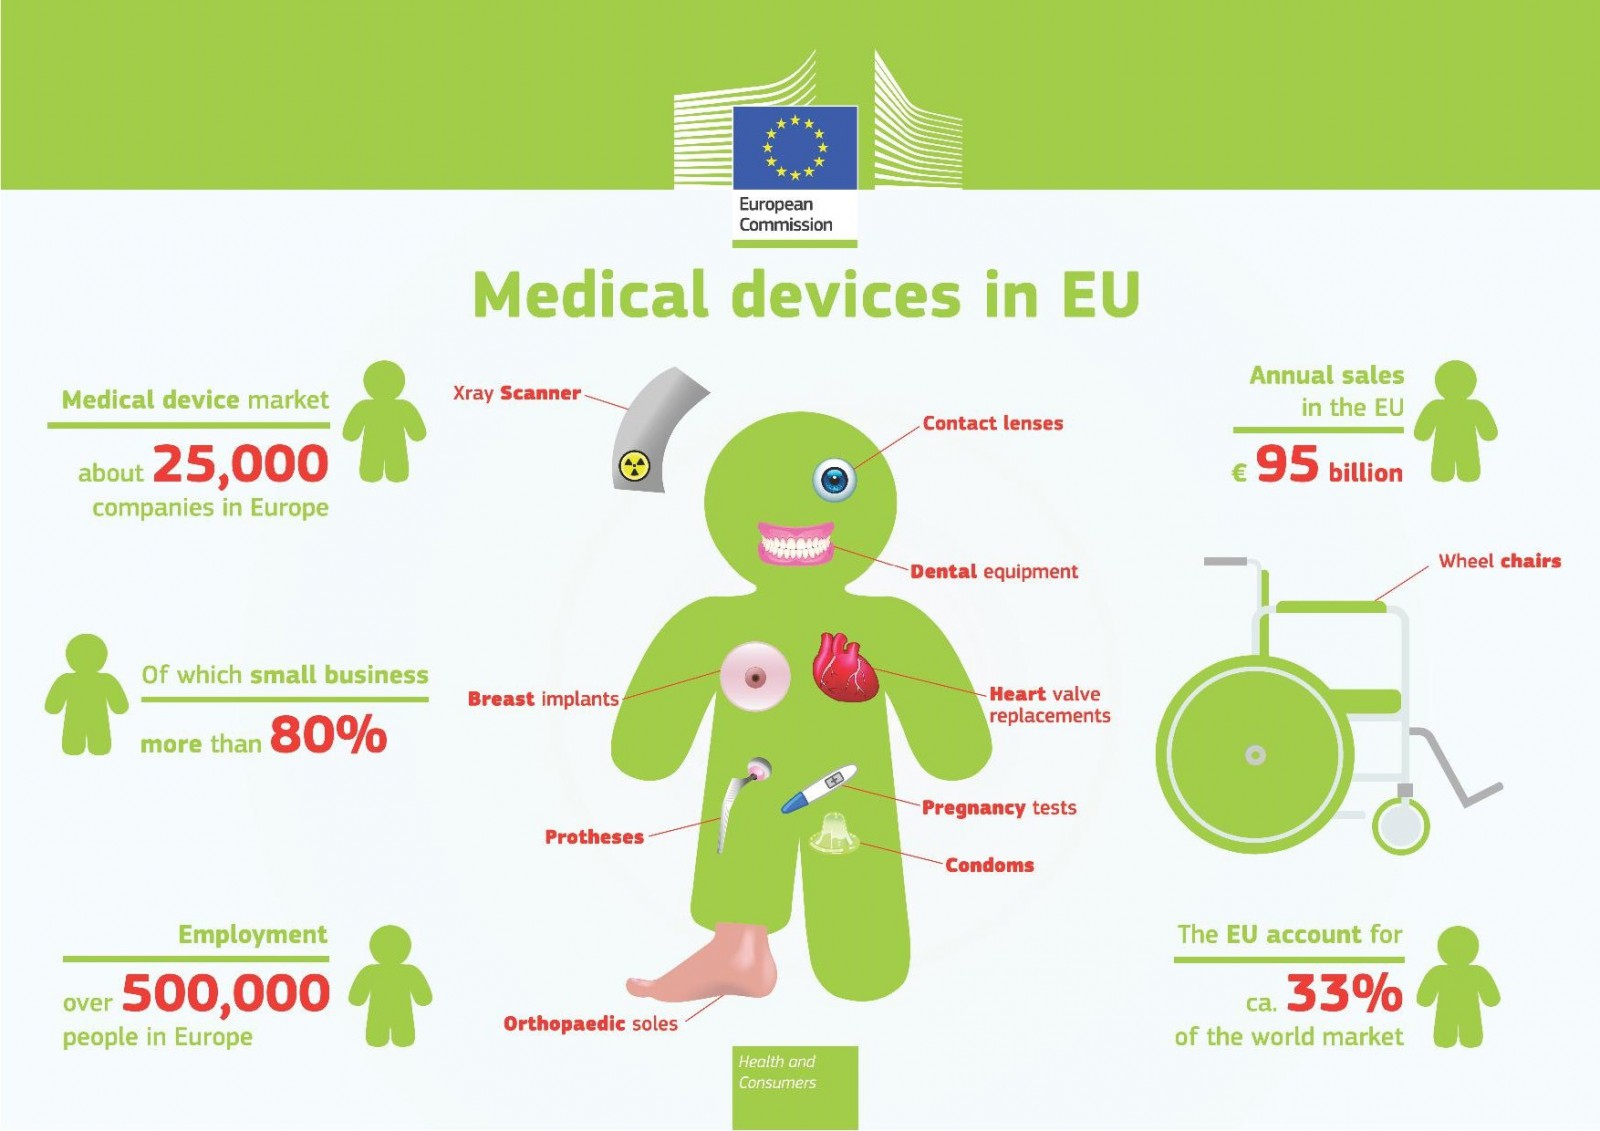 Medical products in Europe market volume (Quelle European Commission 2014)